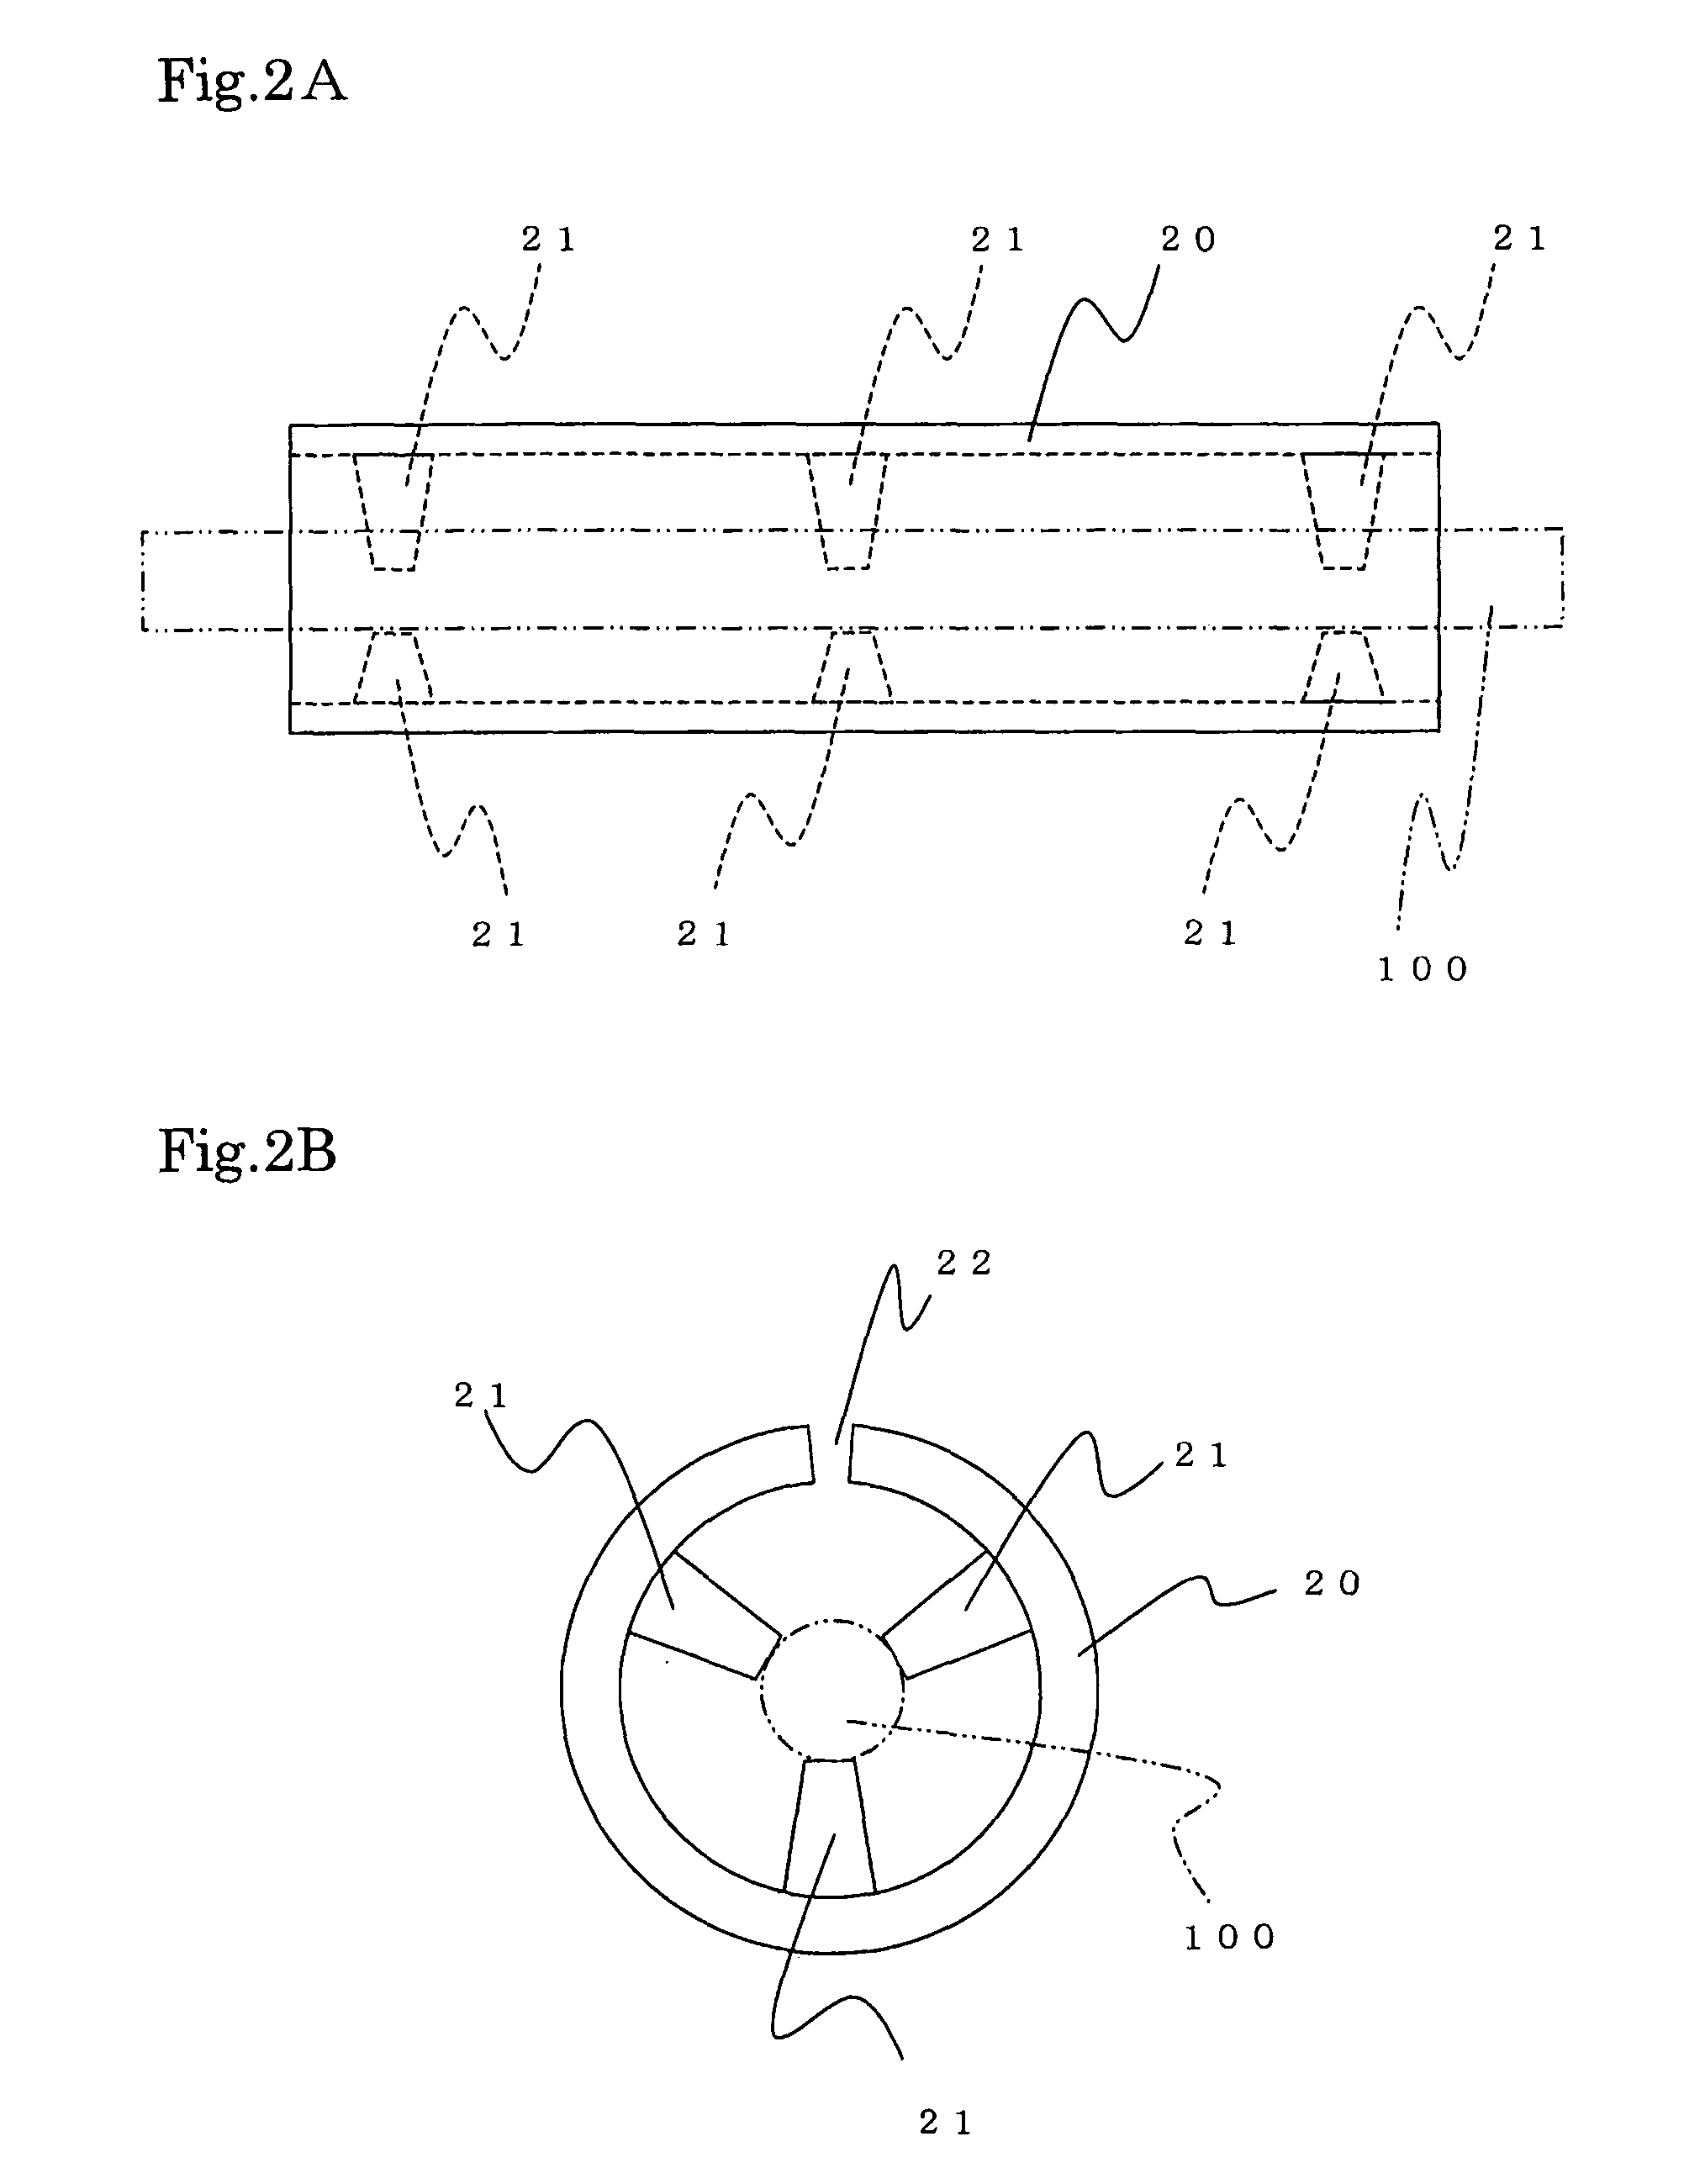 Electric power supply apparatus attached to overhead line to supply electric power to load